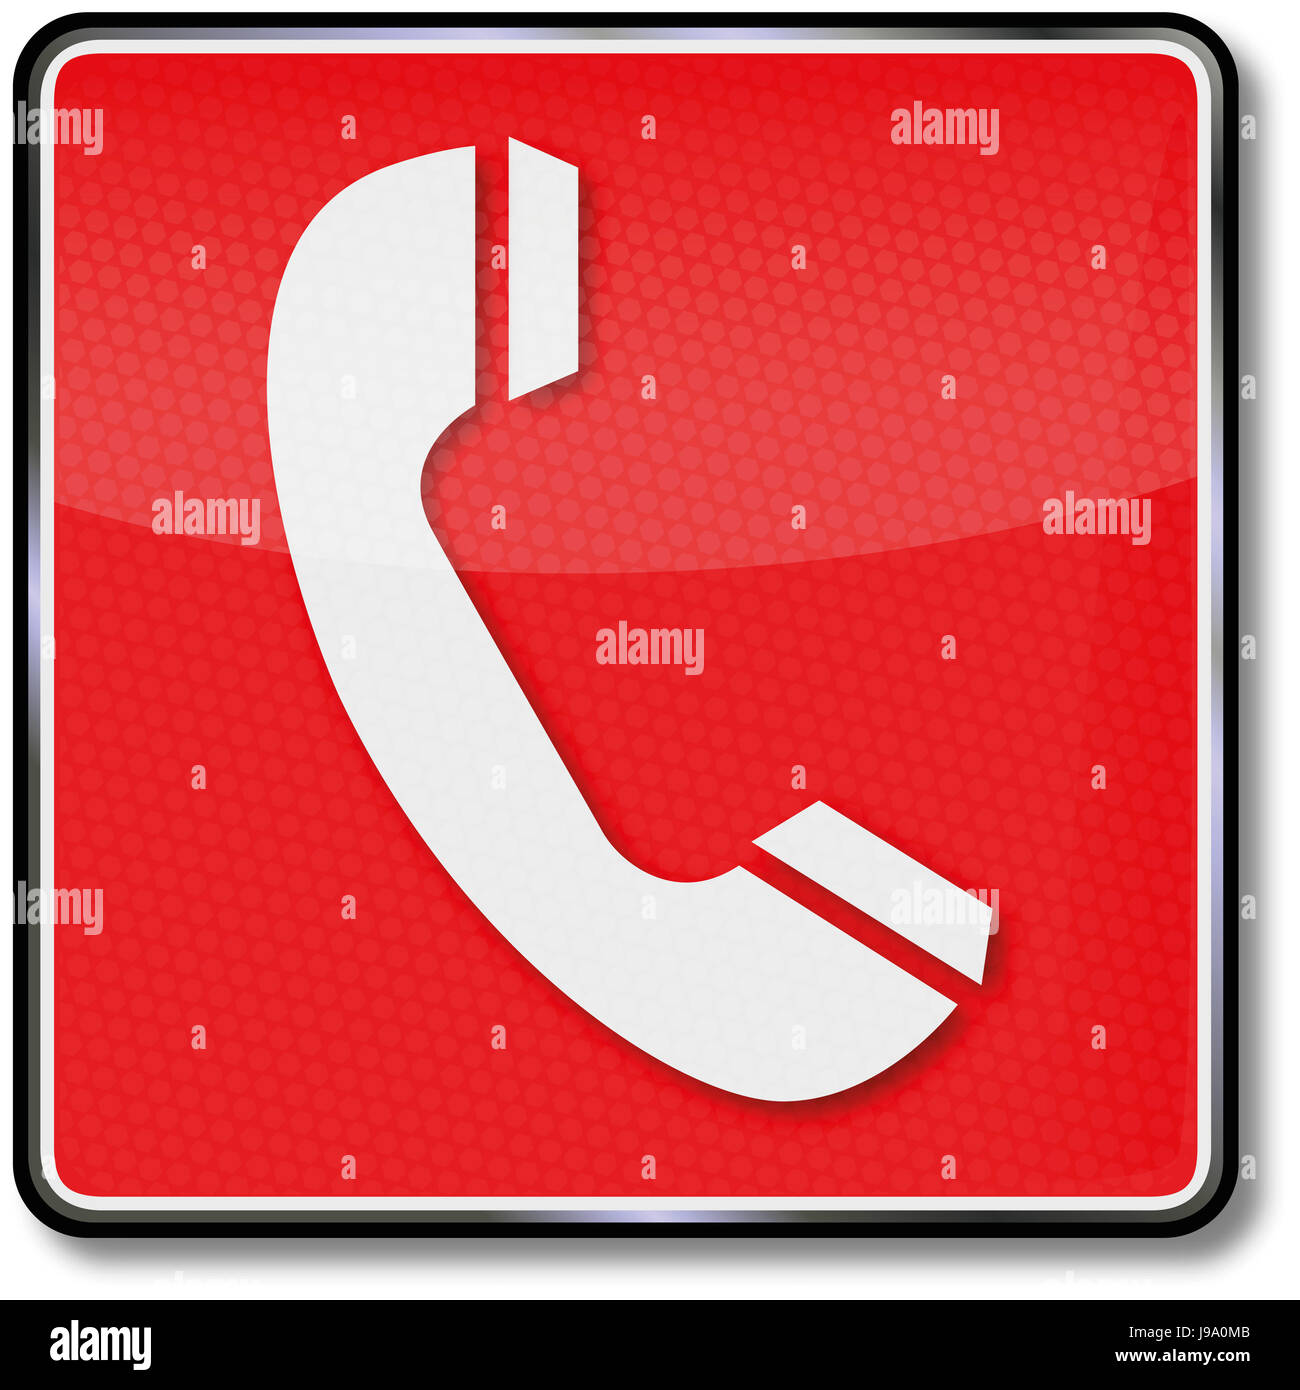 telephone, phone, fire brigade, fire signaling, assistance, help, support, aid, Stock Photo